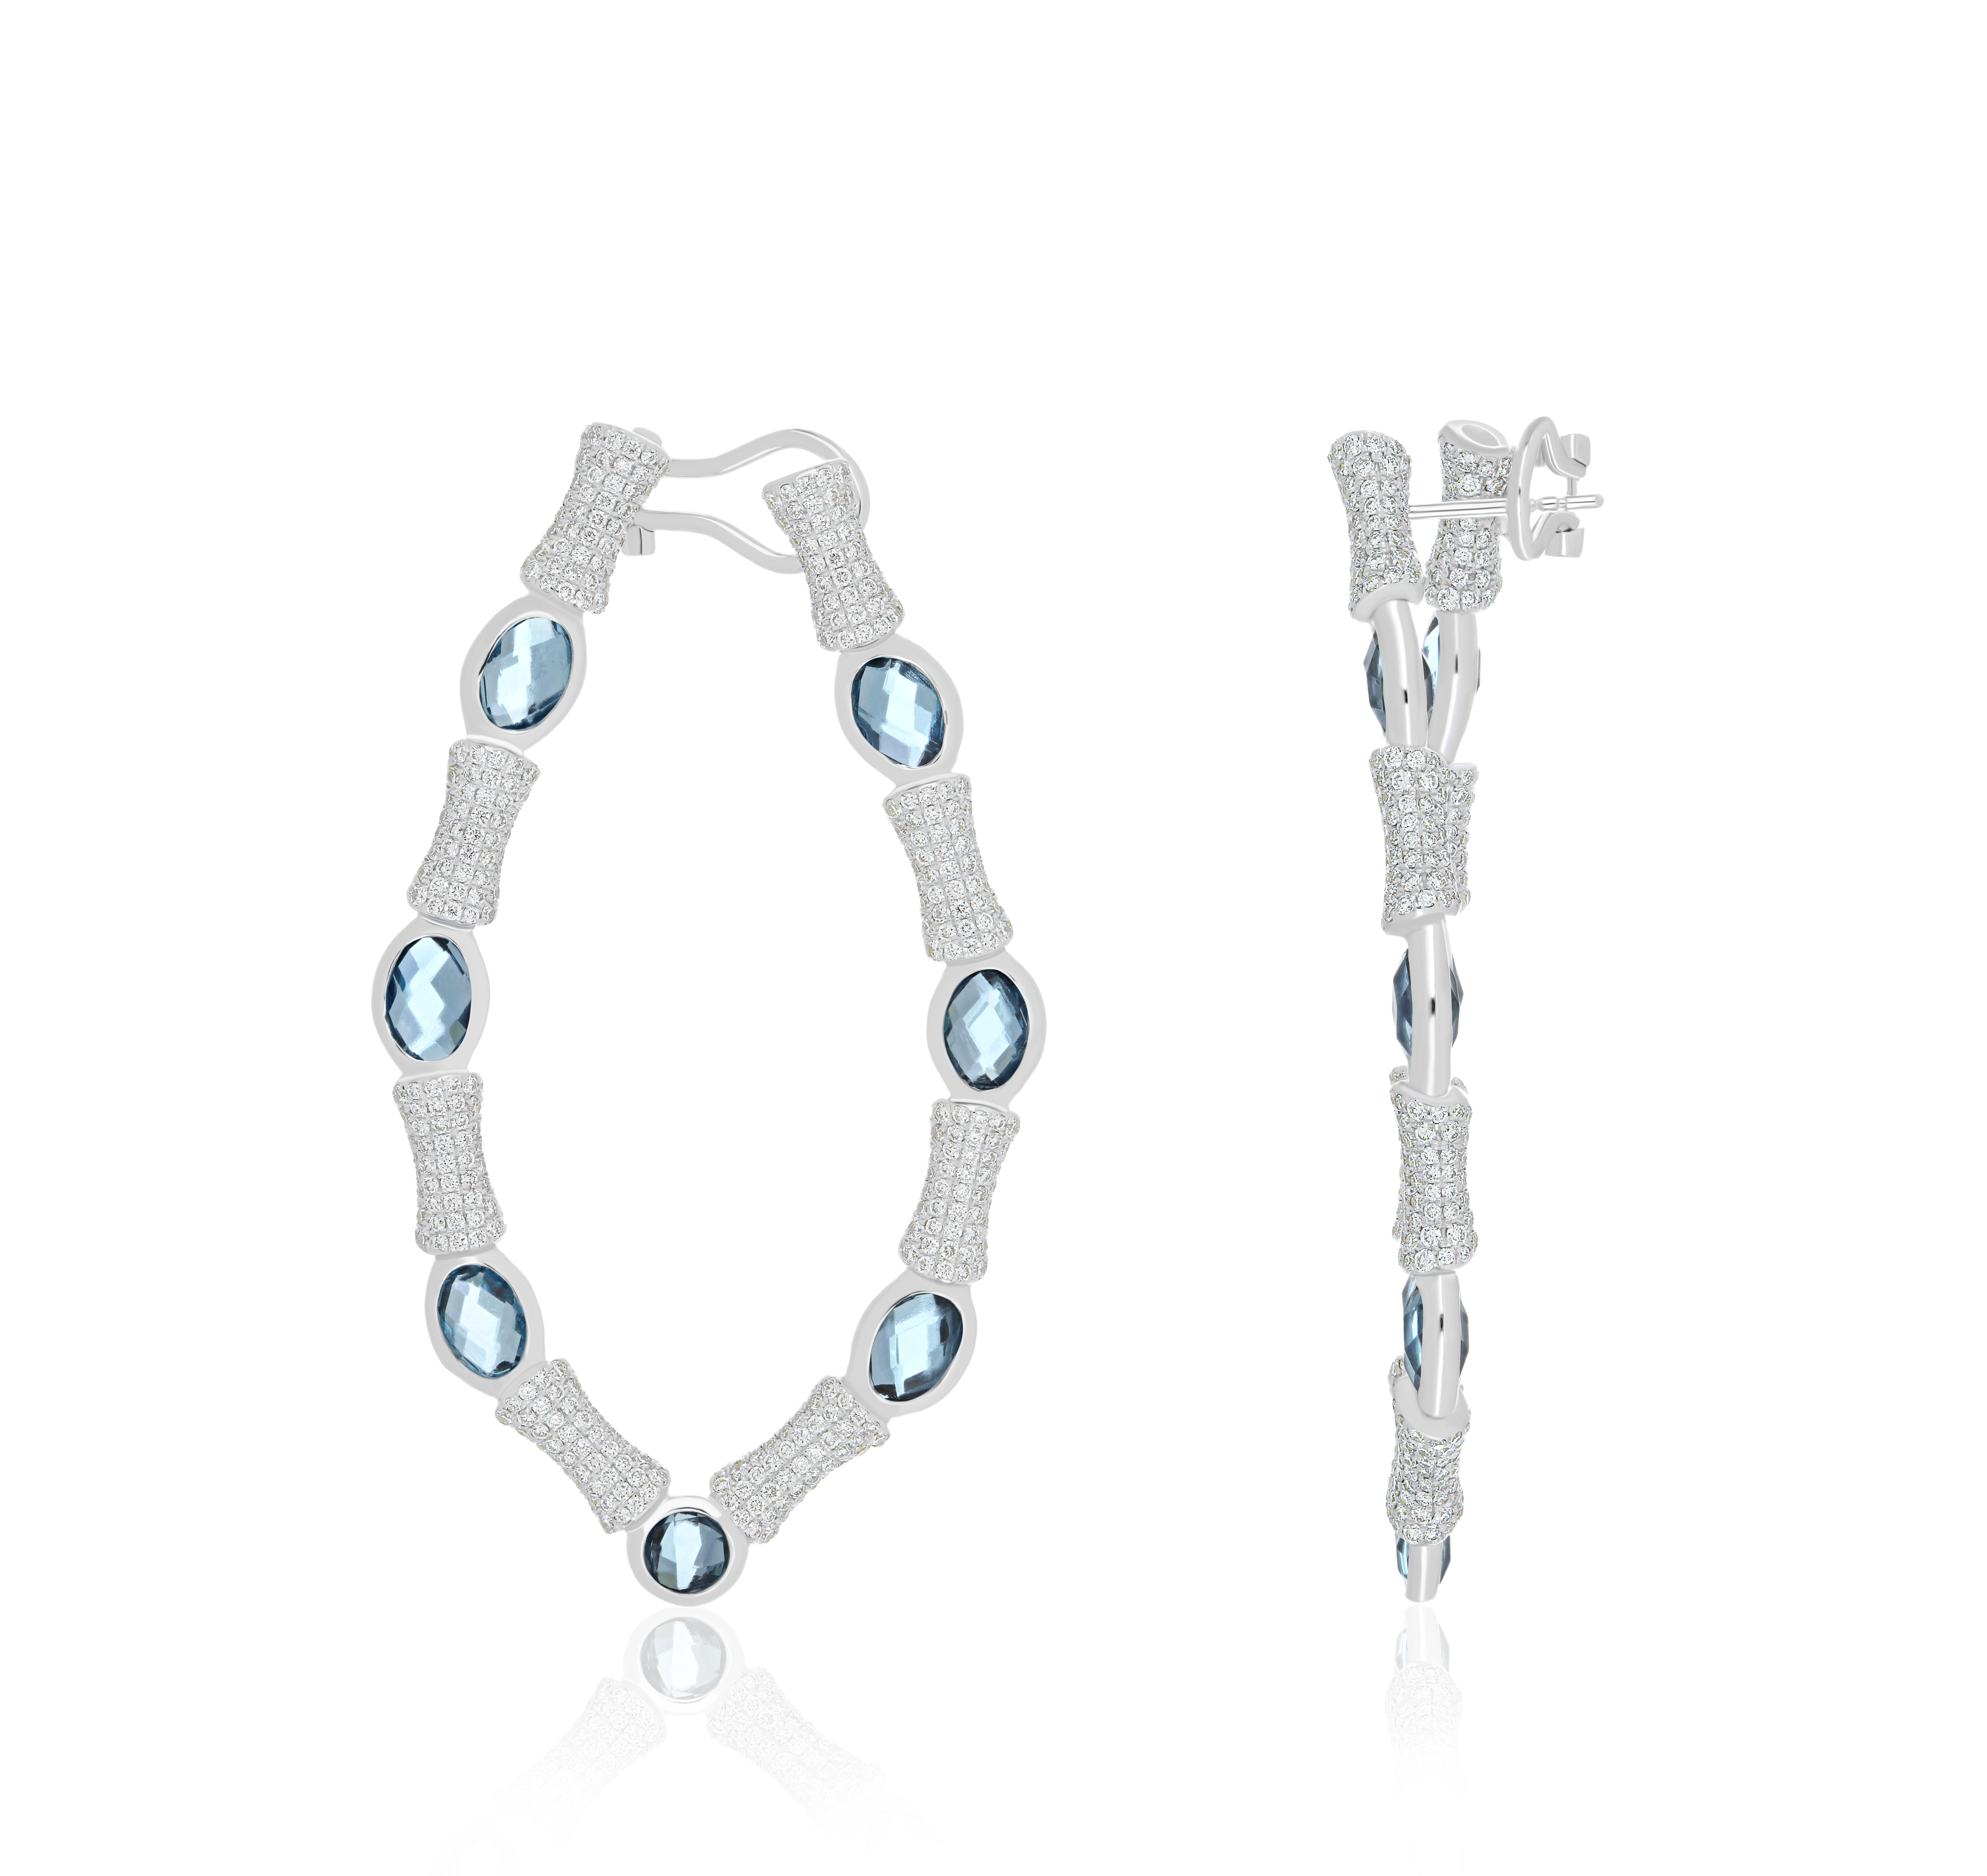 Elegant and Exquisitely detailed 14karat White Gold Earring, with  14.44 Cts (approx. total ) Oval Shape London Blue Topaz Briolette Surrounded by Micro pave Diamonds, weighing approx.  6.20 CT's. (approx. ) total carat weight to further enhance the